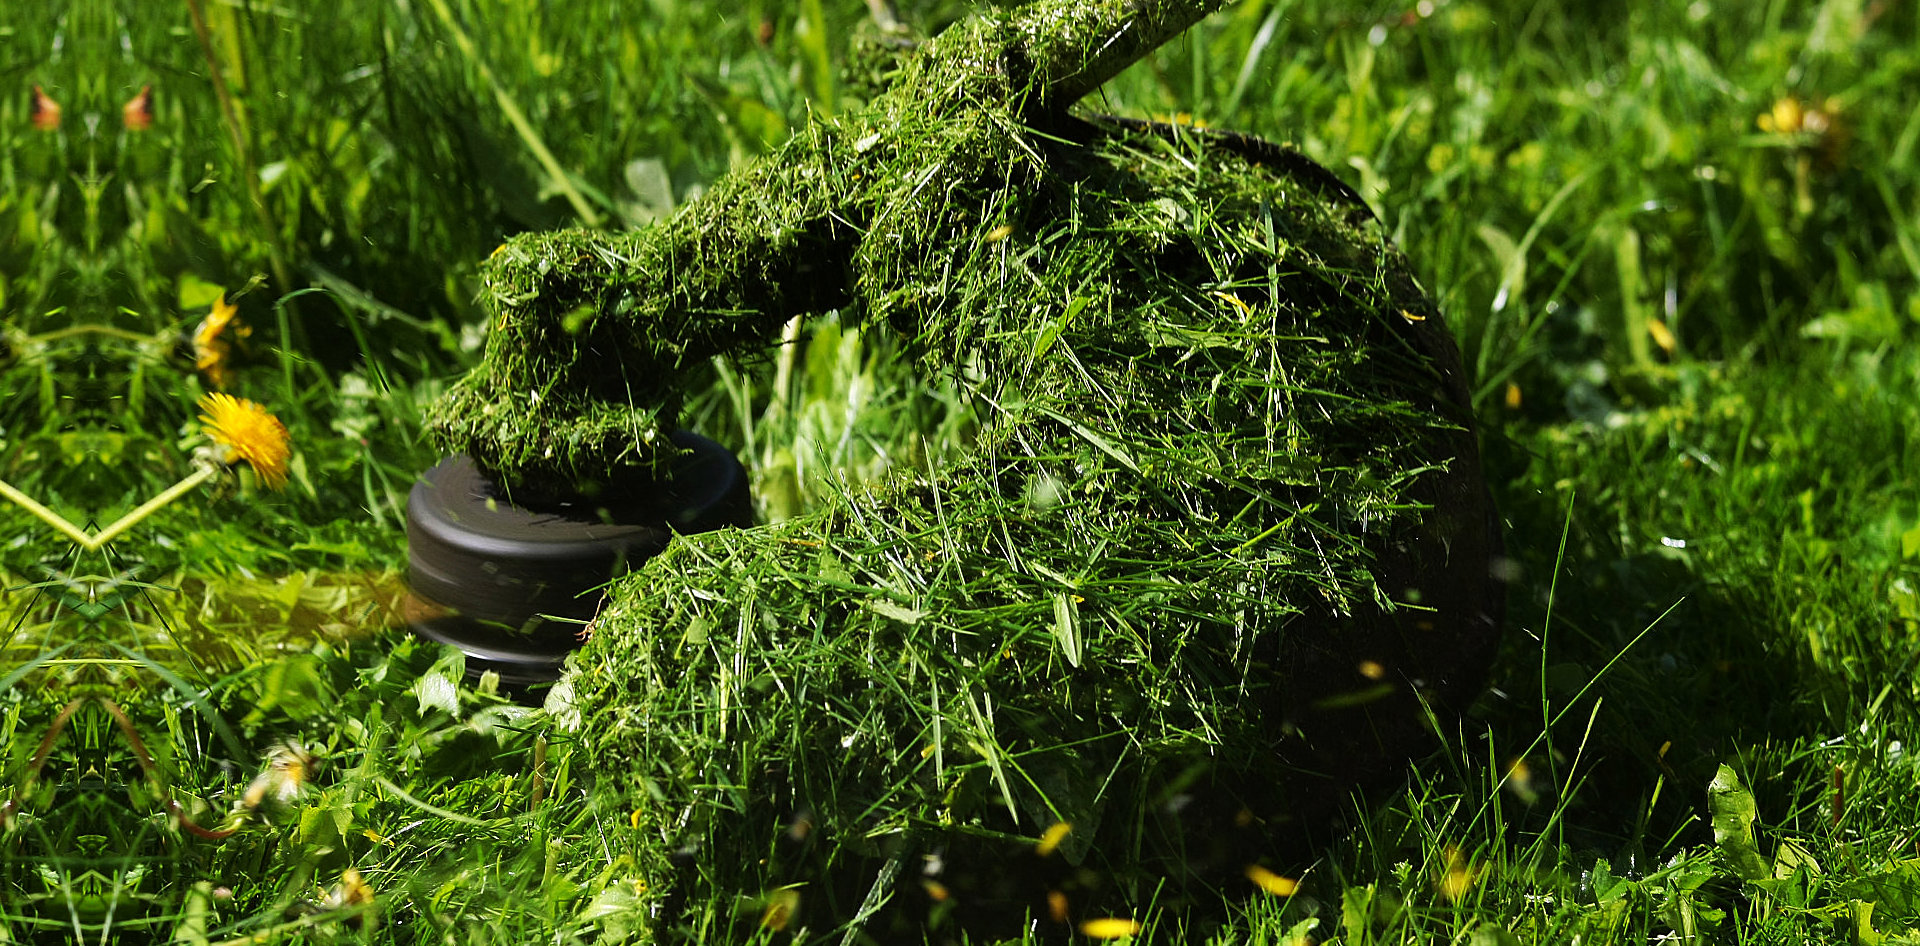 grass cutter in close up view